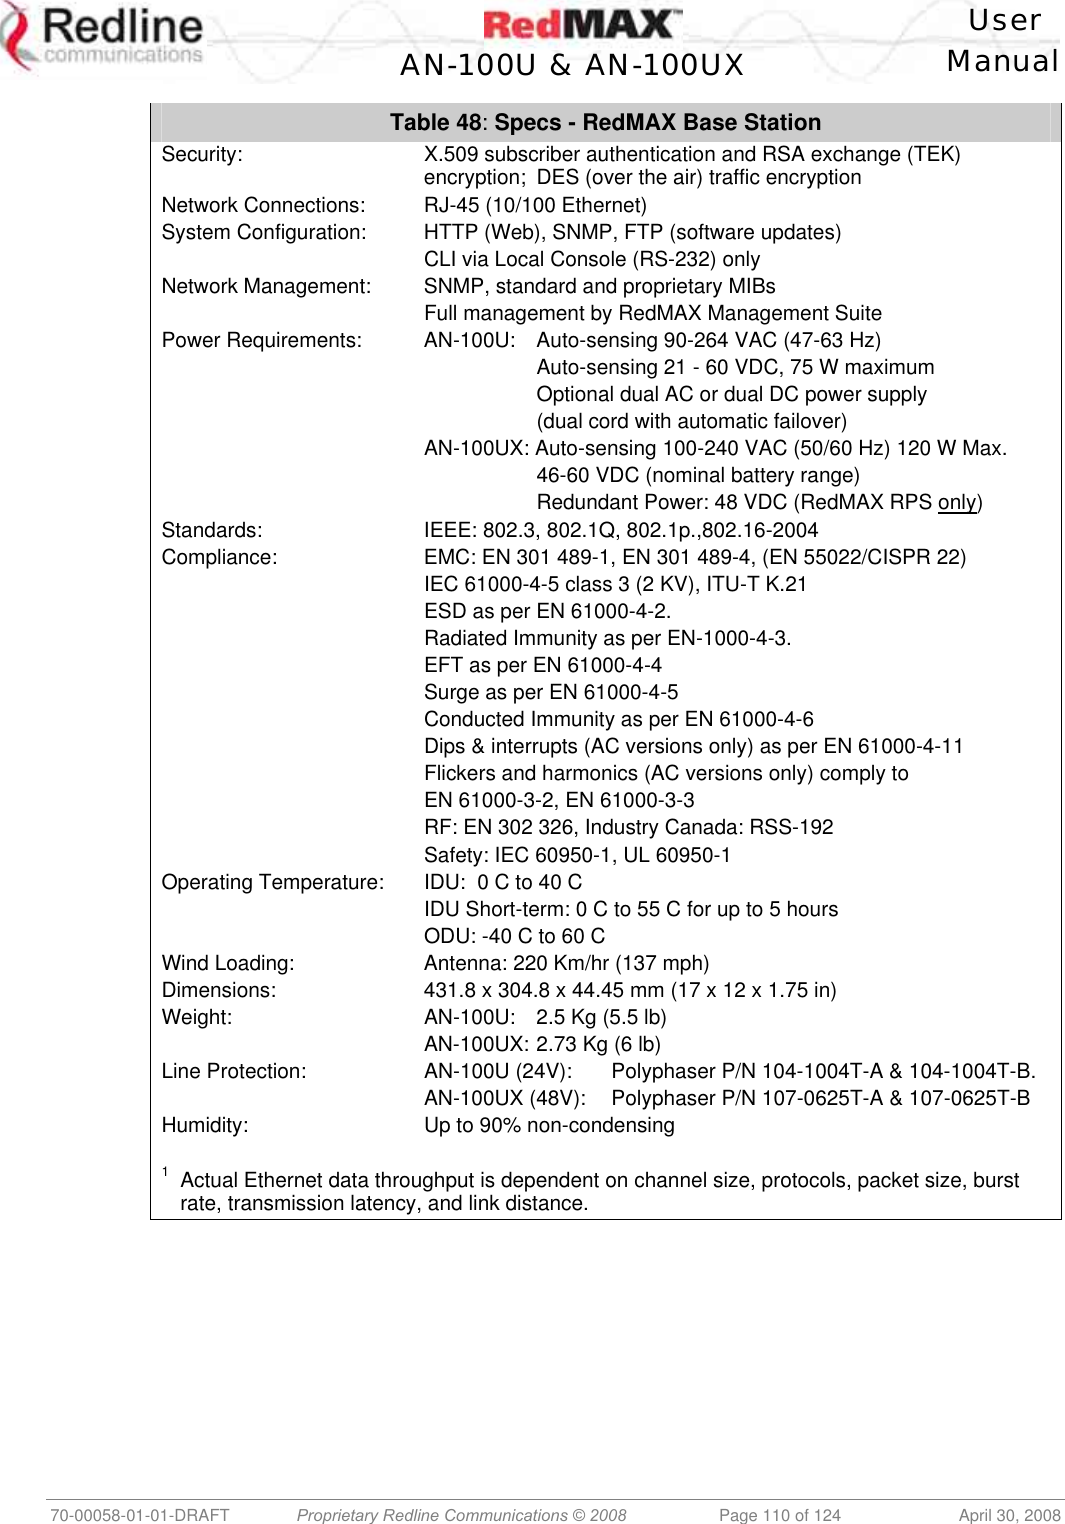    User  AN-100U &amp; AN-100UX Manual   70-00058-01-01-DRAFT  Proprietary Redline Communications © 2008   Page 110 of 124  April 30, 2008 Table 48: Specs - RedMAX Base Station Security:  X.509 subscriber authentication and RSA exchange (TEK) encryption;  DES (over the air) traffic encryption Network Connections:  RJ-45 (10/100 Ethernet) System Configuration:  HTTP (Web), SNMP, FTP (software updates)   CLI via Local Console (RS-232) only Network Management:  SNMP, standard and proprietary MIBs   Full management by RedMAX Management Suite Power Requirements:  AN-100U:  Auto-sensing 90-264 VAC (47-63 Hz)       Auto-sensing 21 - 60 VDC, 75 W maximum       Optional dual AC or dual DC power supply       (dual cord with automatic failover)   AN-100UX: Auto-sensing 100-240 VAC (50/60 Hz) 120 W Max.       46-60 VDC (nominal battery range)       Redundant Power: 48 VDC (RedMAX RPS only) Standards: IEEE: 802.3, 802.1Q, 802.1p.,802.16-2004 Compliance:  EMC: EN 301 489-1, EN 301 489-4, (EN 55022/CISPR 22)   IEC 61000-4-5 class 3 (2 KV), ITU-T K.21   ESD as per EN 61000-4-2.   Radiated Immunity as per EN-1000-4-3.   EFT as per EN 61000-4-4   Surge as per EN 61000-4-5   Conducted Immunity as per EN 61000-4-6   Dips &amp; interrupts (AC versions only) as per EN 61000-4-11   Flickers and harmonics (AC versions only) comply to   EN 61000-3-2, EN 61000-3-3   RF: EN 302 326, Industry Canada: RSS-192   Safety: IEC 60950-1, UL 60950-1 Operating Temperature:  IDU:  0 C to 40 C   IDU Short-term: 0 C to 55 C for up to 5 hours   ODU: -40 C to 60 C Wind Loading:  Antenna: 220 Km/hr (137 mph) Dimensions:   431.8 x 304.8 x 44.45 mm (17 x 12 x 1.75 in) Weight:  AN-100U:  2.5 Kg (5.5 lb)   AN-100UX: 2.73 Kg (6 lb) Line Protection:  AN-100U (24V):  Polyphaser P/N 104-1004T-A &amp; 104-1004T-B.   AN-100UX (48V):  Polyphaser P/N 107-0625T-A &amp; 107-0625T-B Humidity:  Up to 90% non-condensing  1  Actual Ethernet data throughput is dependent on channel size, protocols, packet size, burst rate, transmission latency, and link distance.  